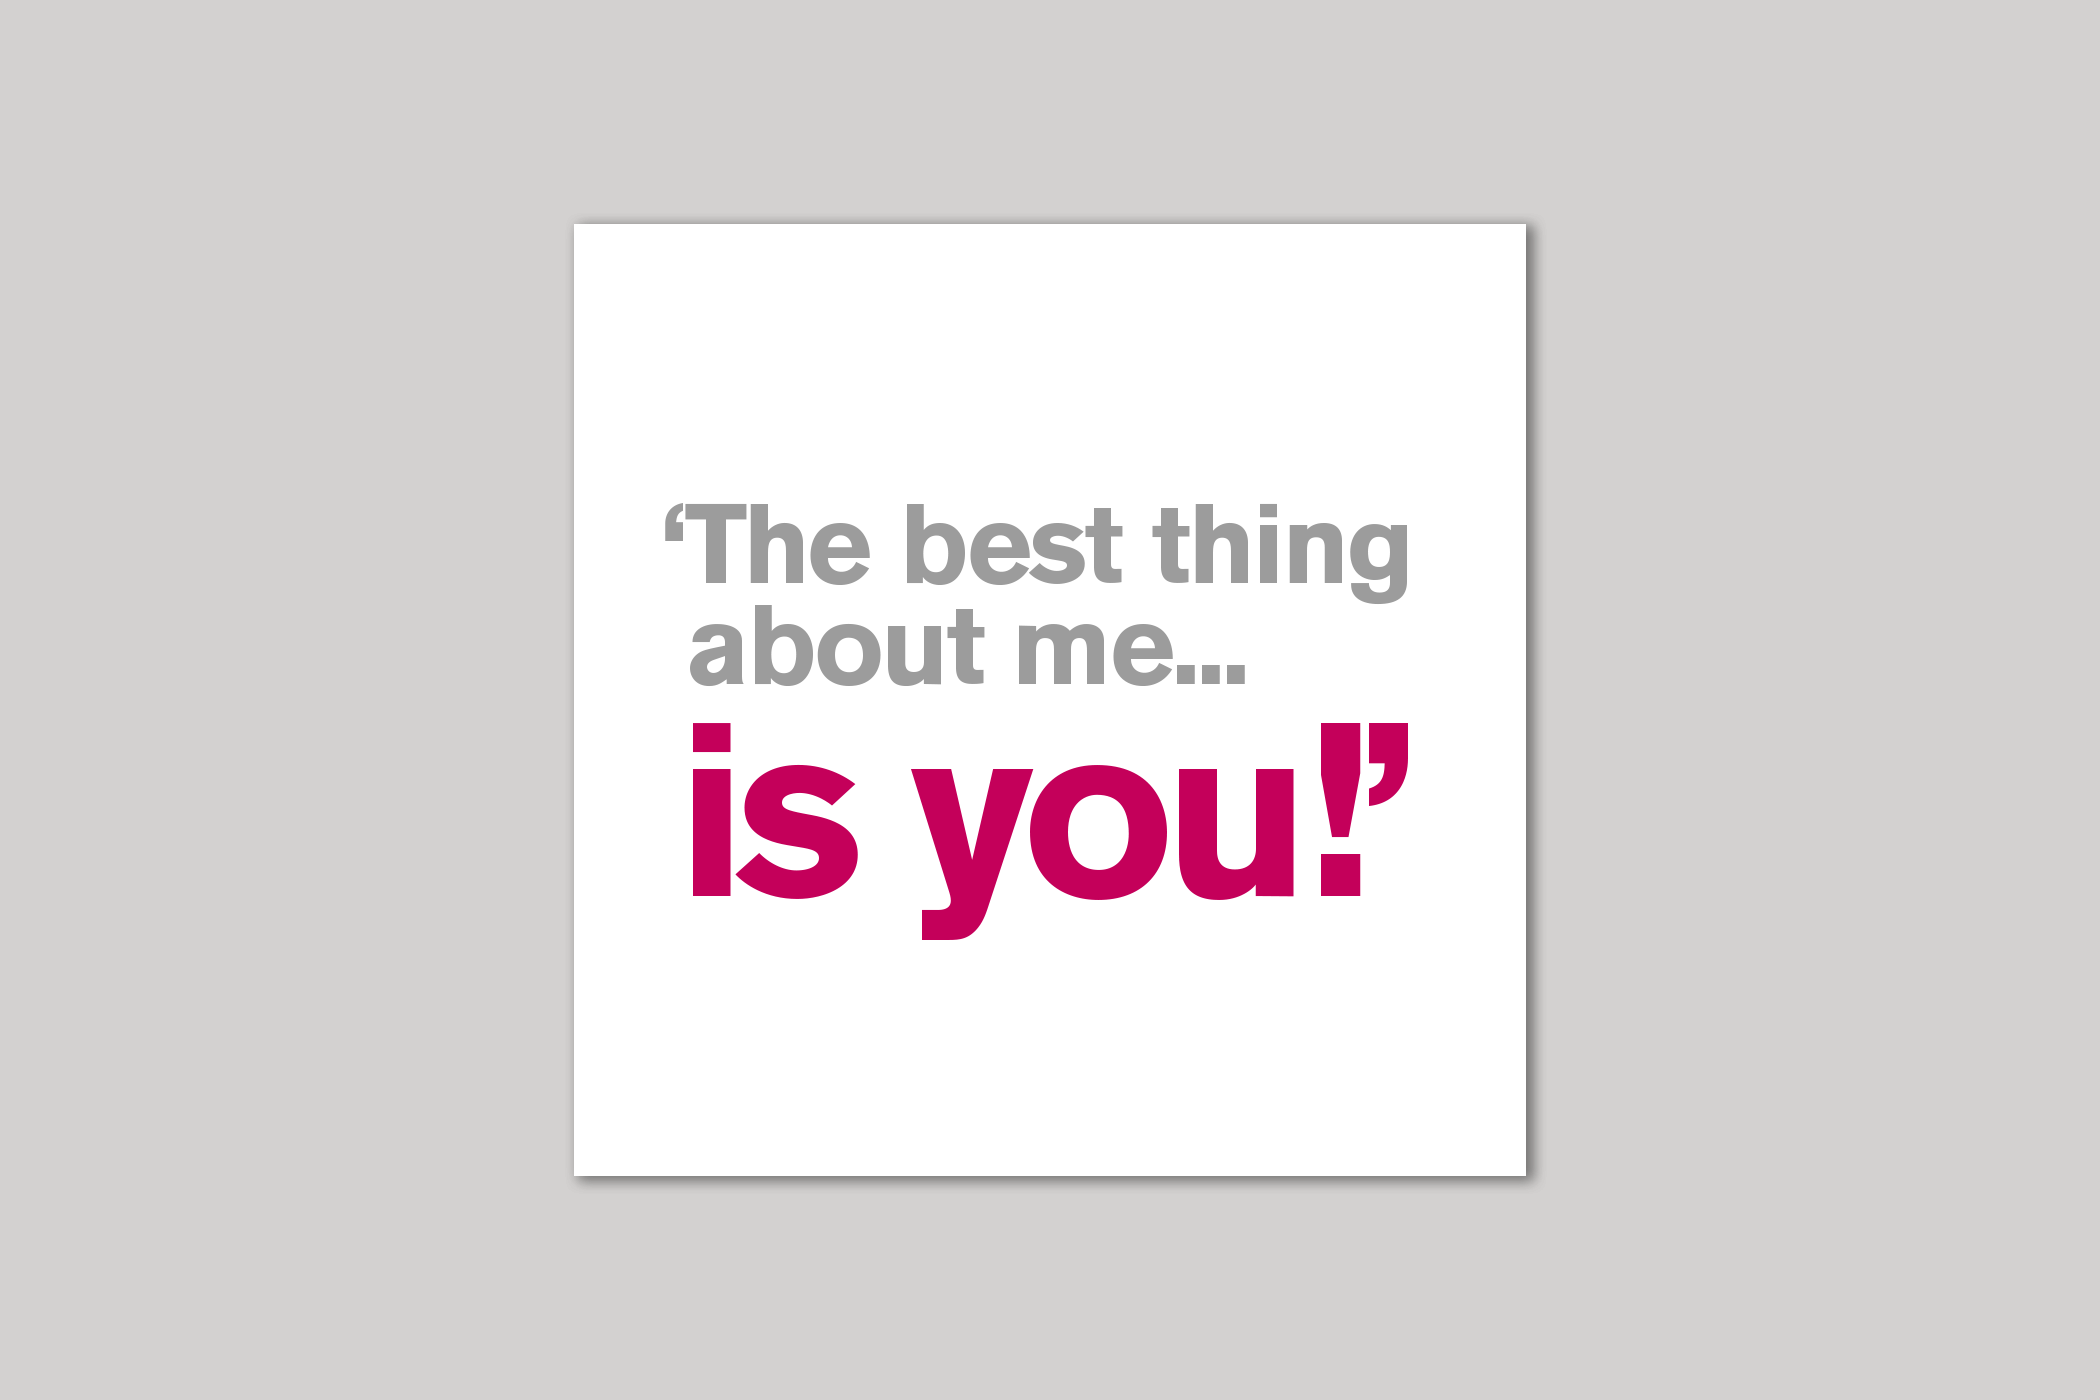 The Best Thing About Me from Lyric range of quotation cards by Icon.